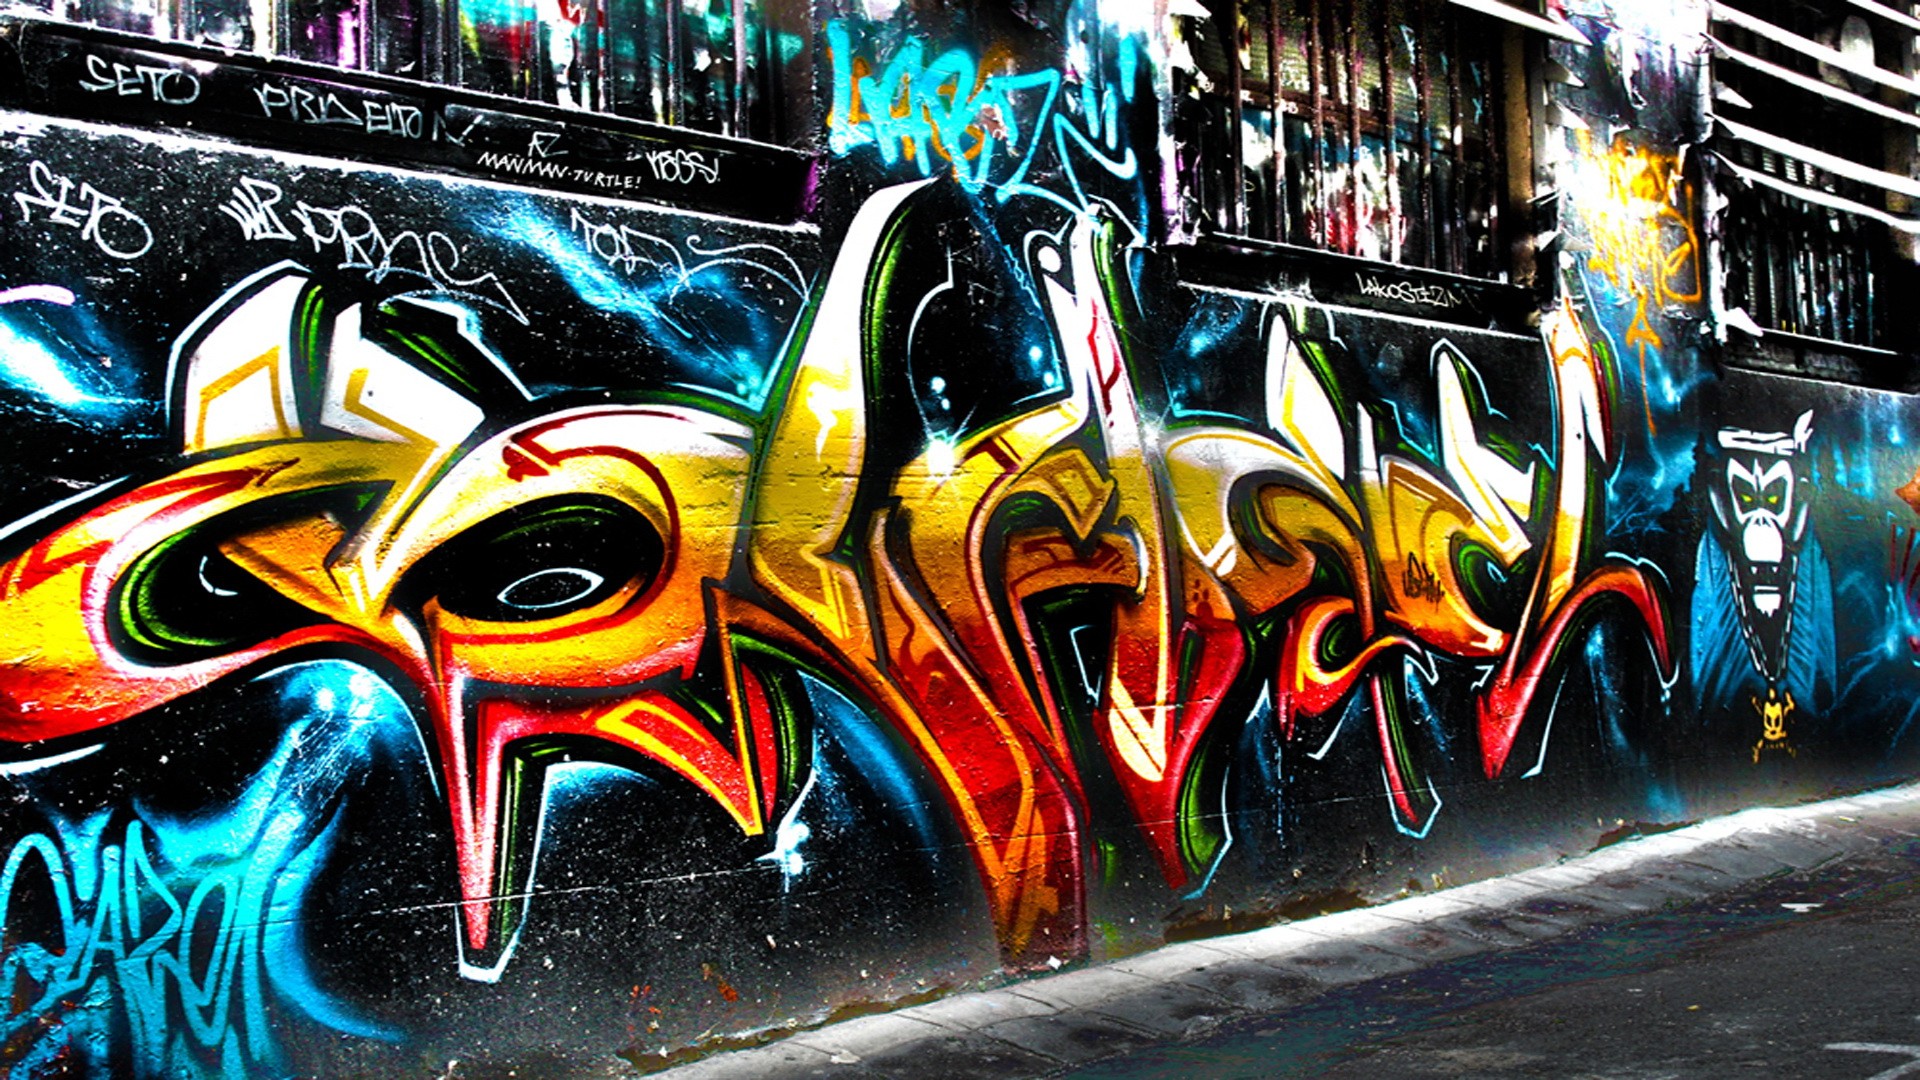 HD Wallpaper Graffiti Letters With Resolution 1920X1080 pixel. You can make this wallpaper for your Desktop Computer Backgrounds, Mac Wallpapers, Android Lock screen or iPhone Screensavers